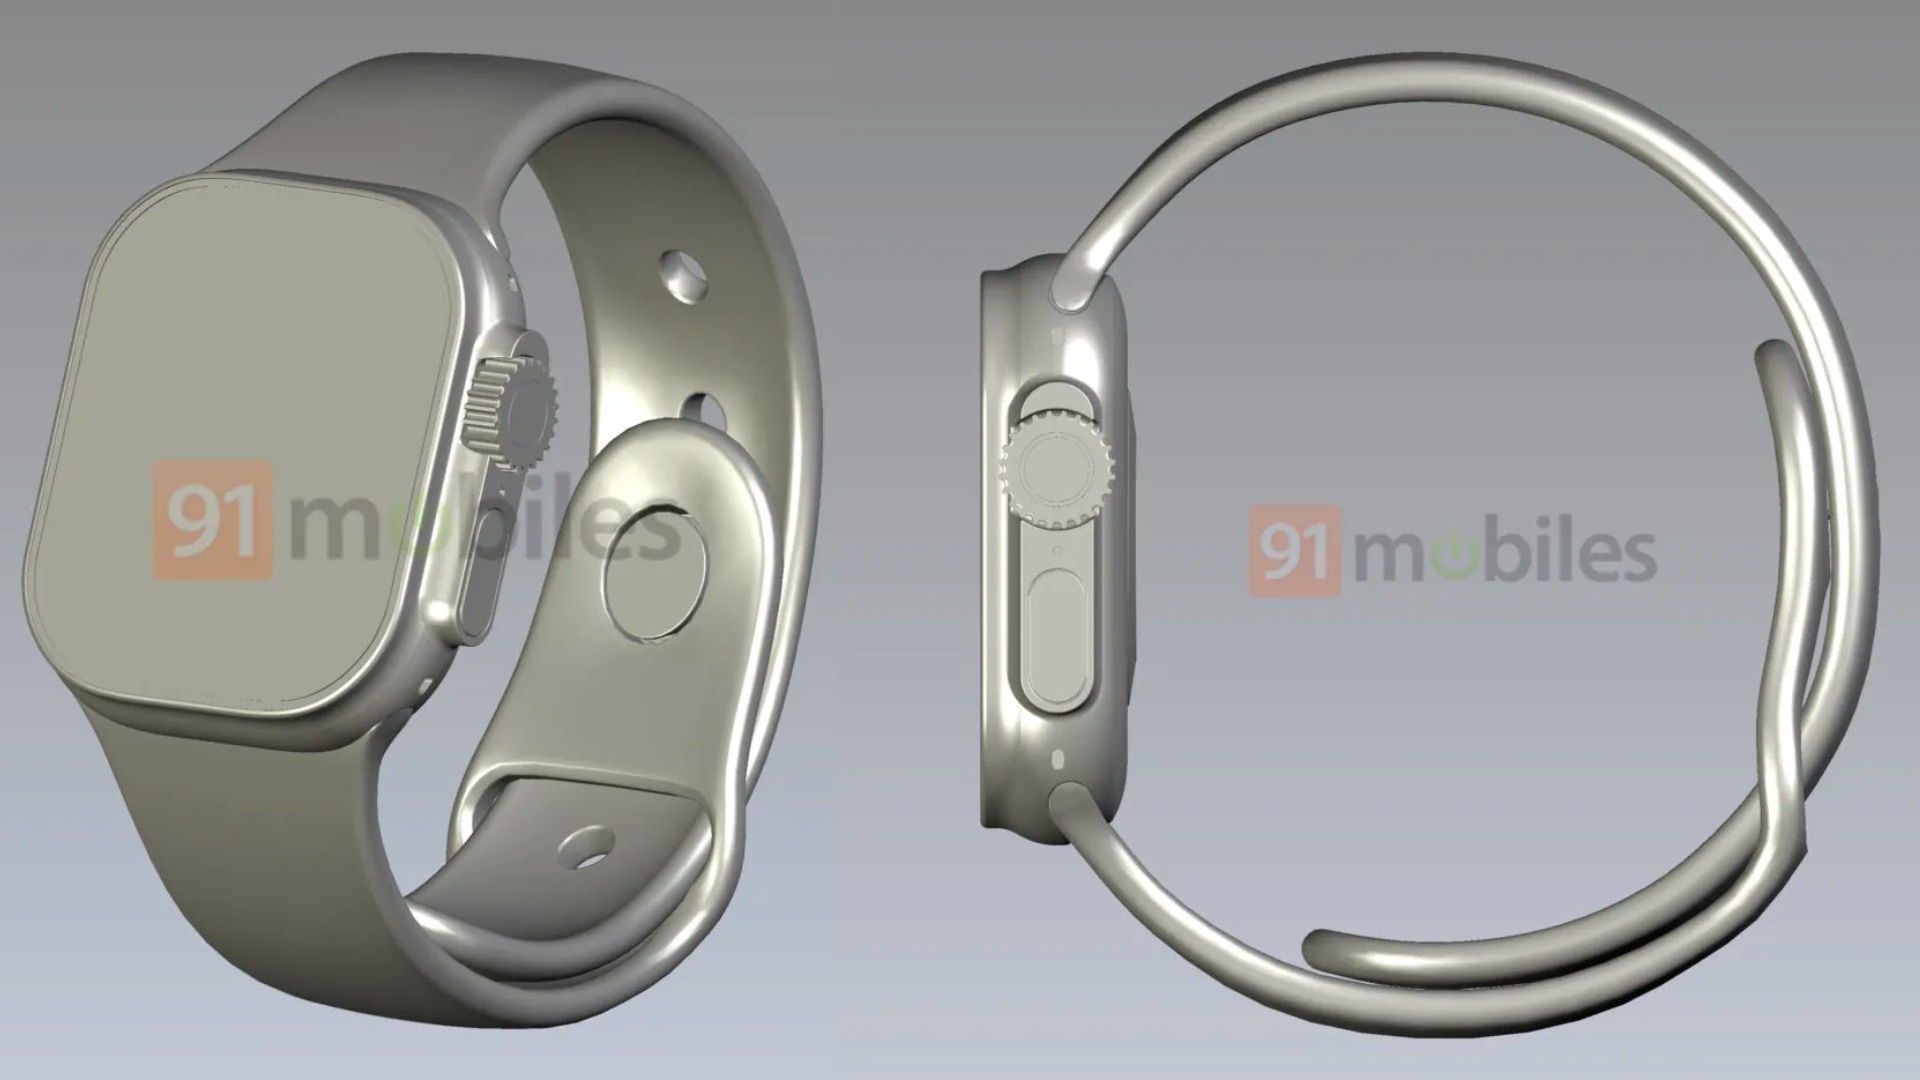 Apple Watch ‘Pro’ CAD Renders Show Flat Screen Design With Extra Button, Protrusion Housing Digital Crown and Side Button